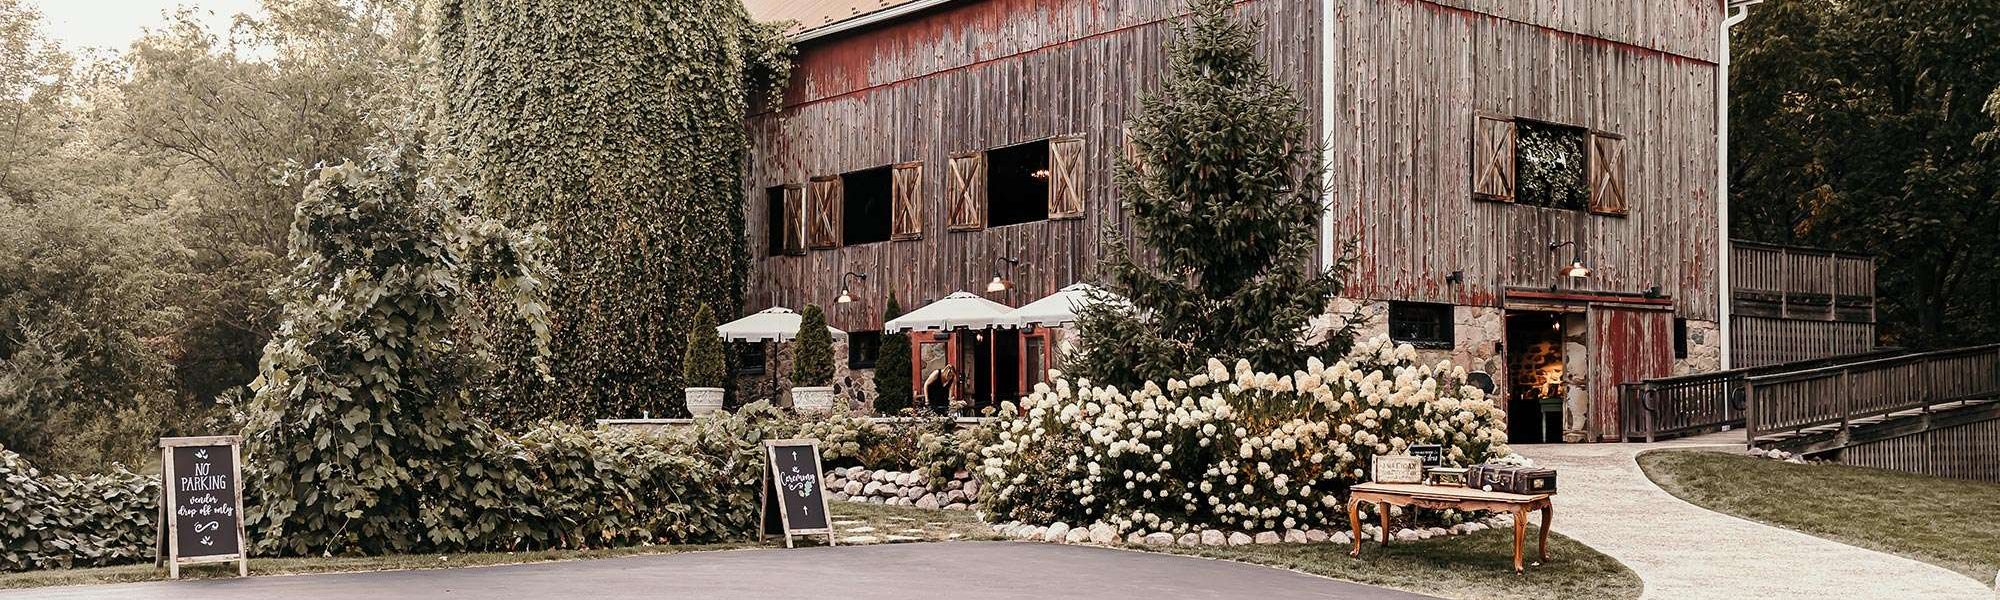 Exterior of Farm at The Dover barn with signage from Esty and Amazon